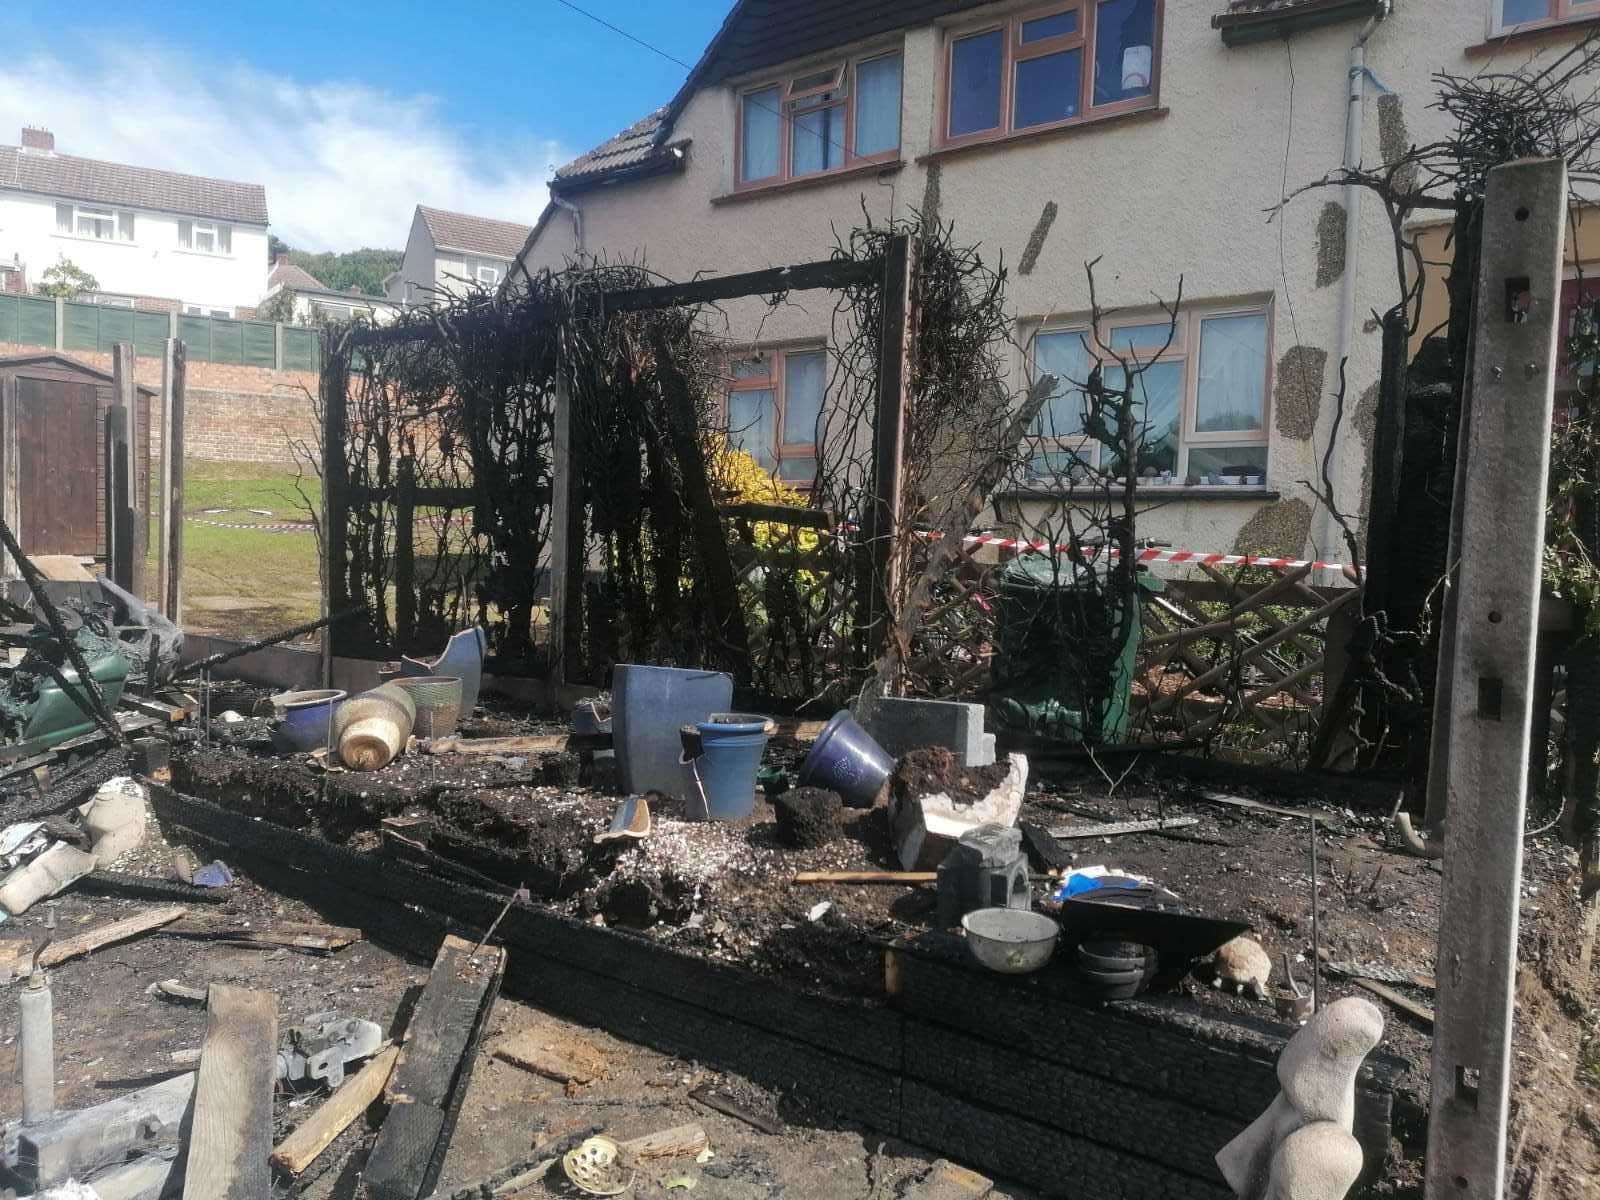 Neighbouring garden fences and panels were destroyed in the fire